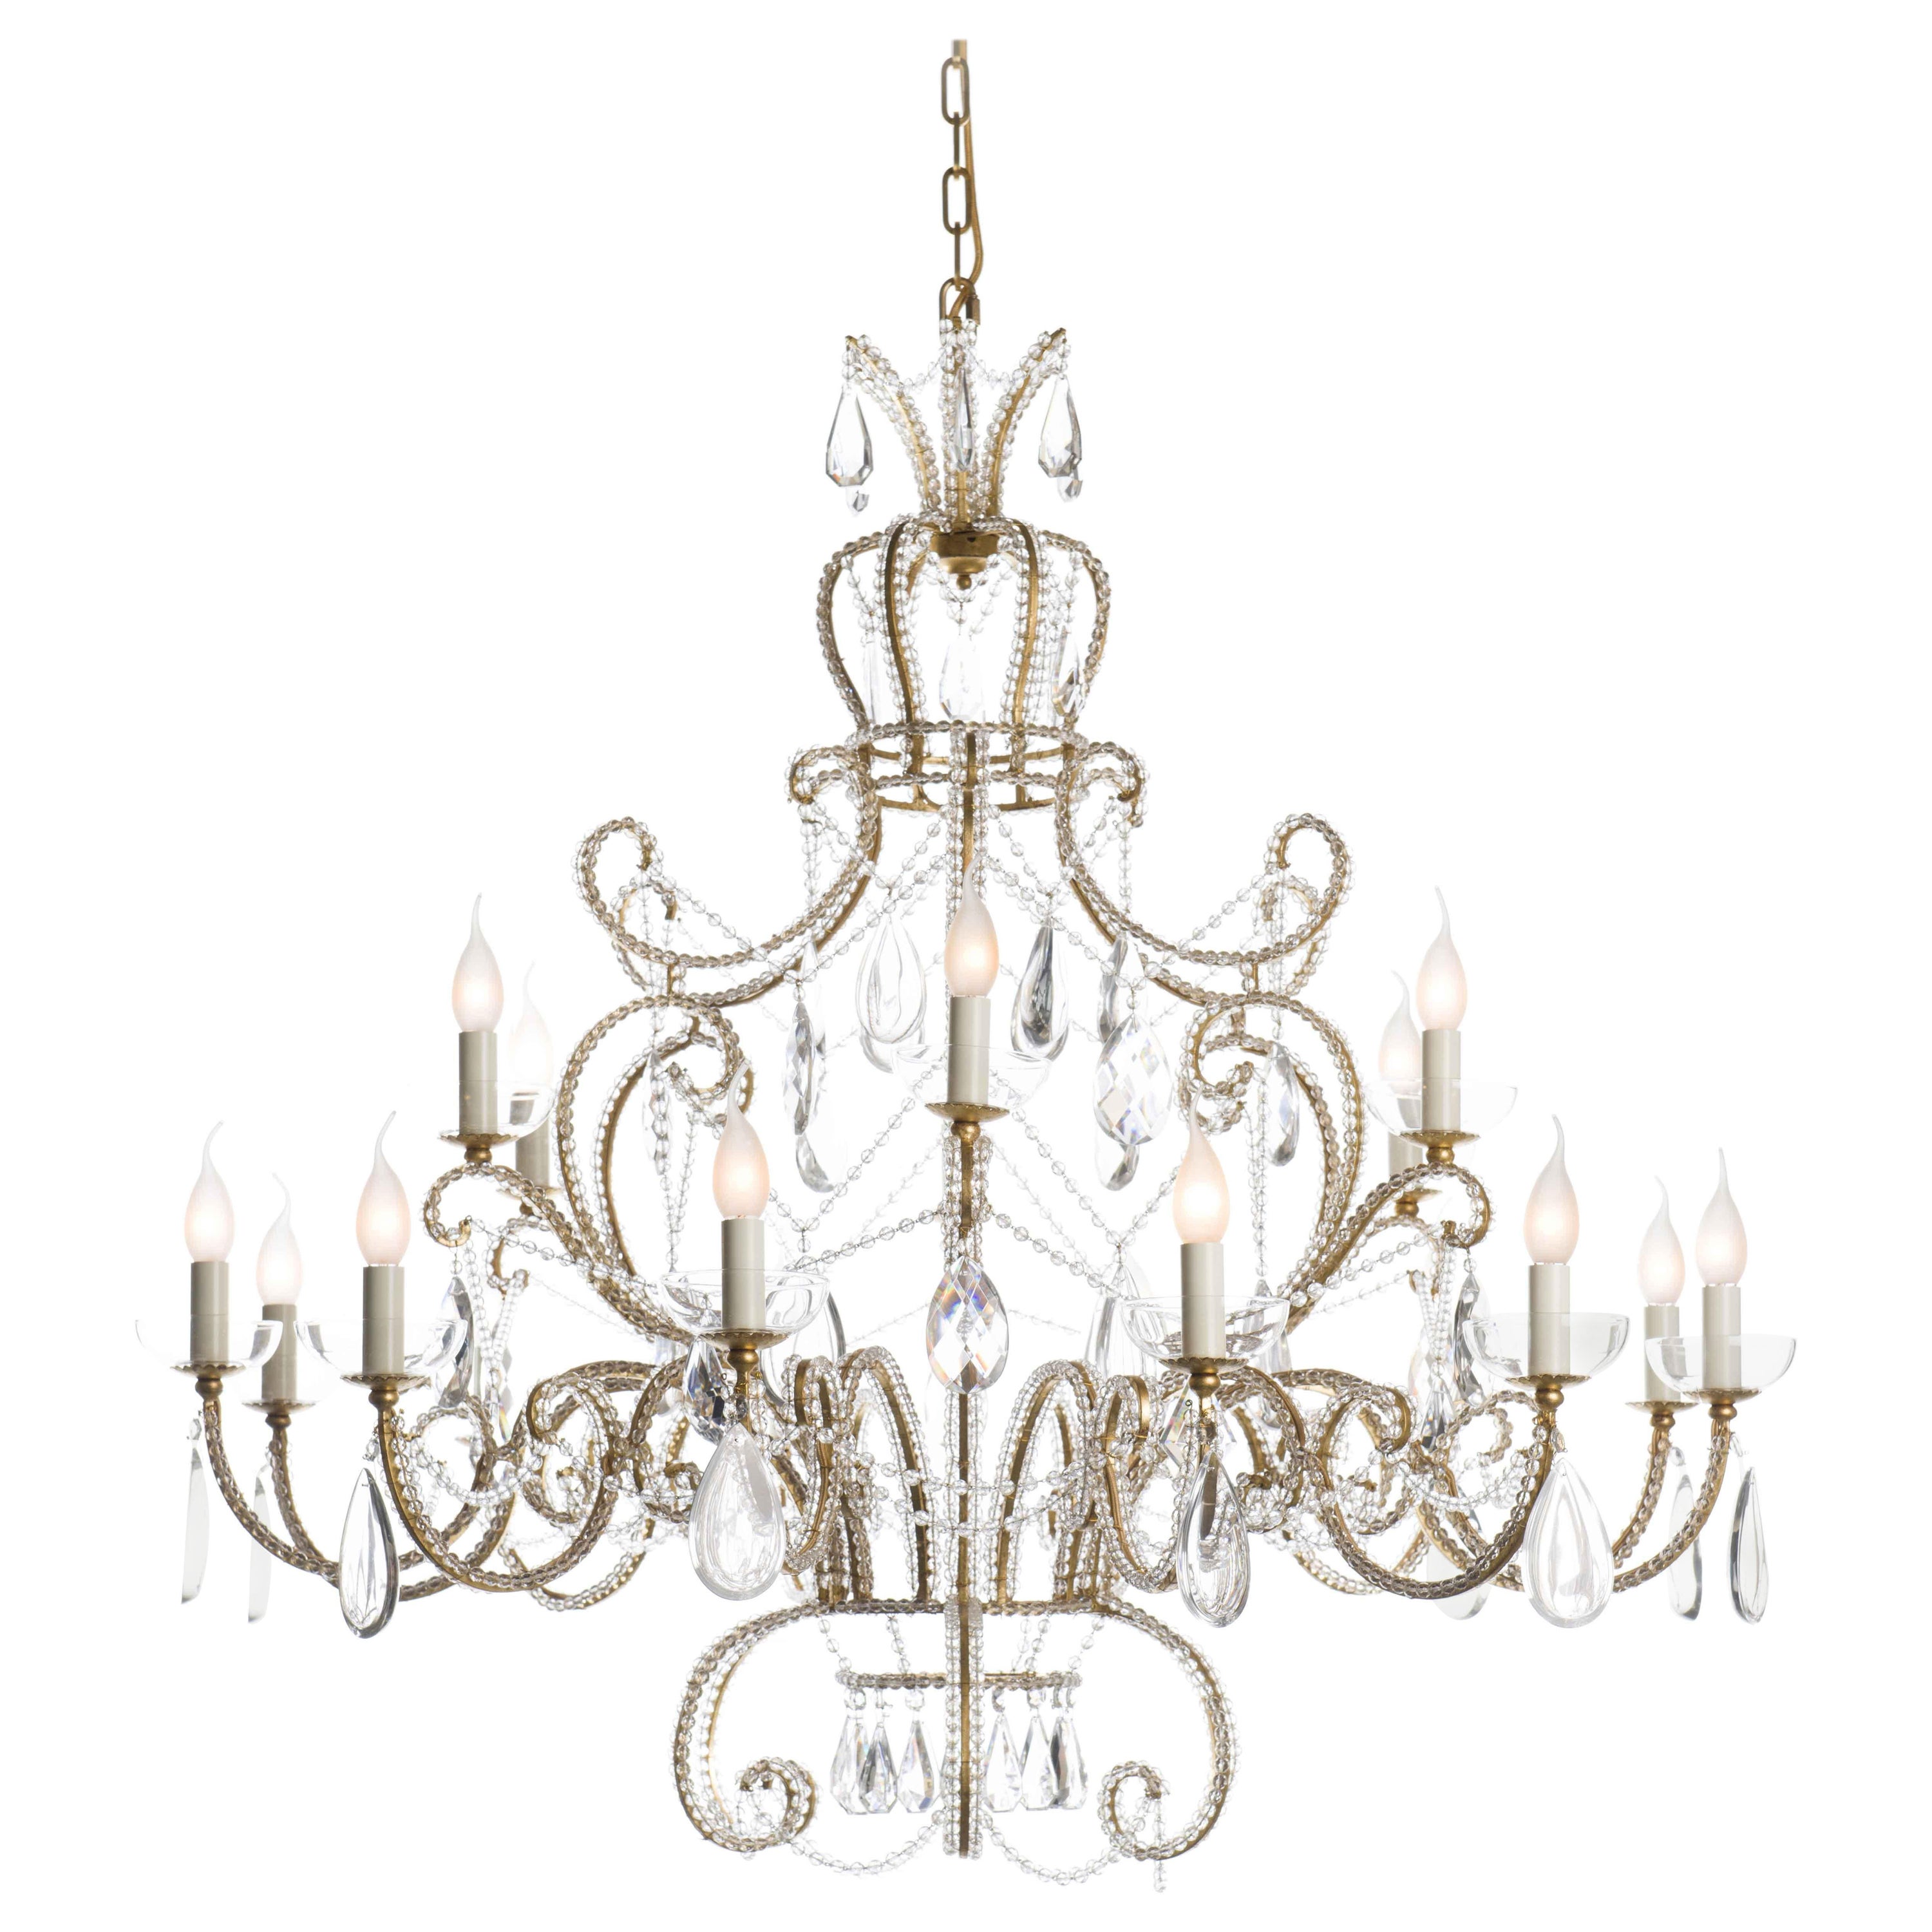 Certified Maison Bagues Chandelier, 18 Lights Iron & Crystal #18132 For Sale